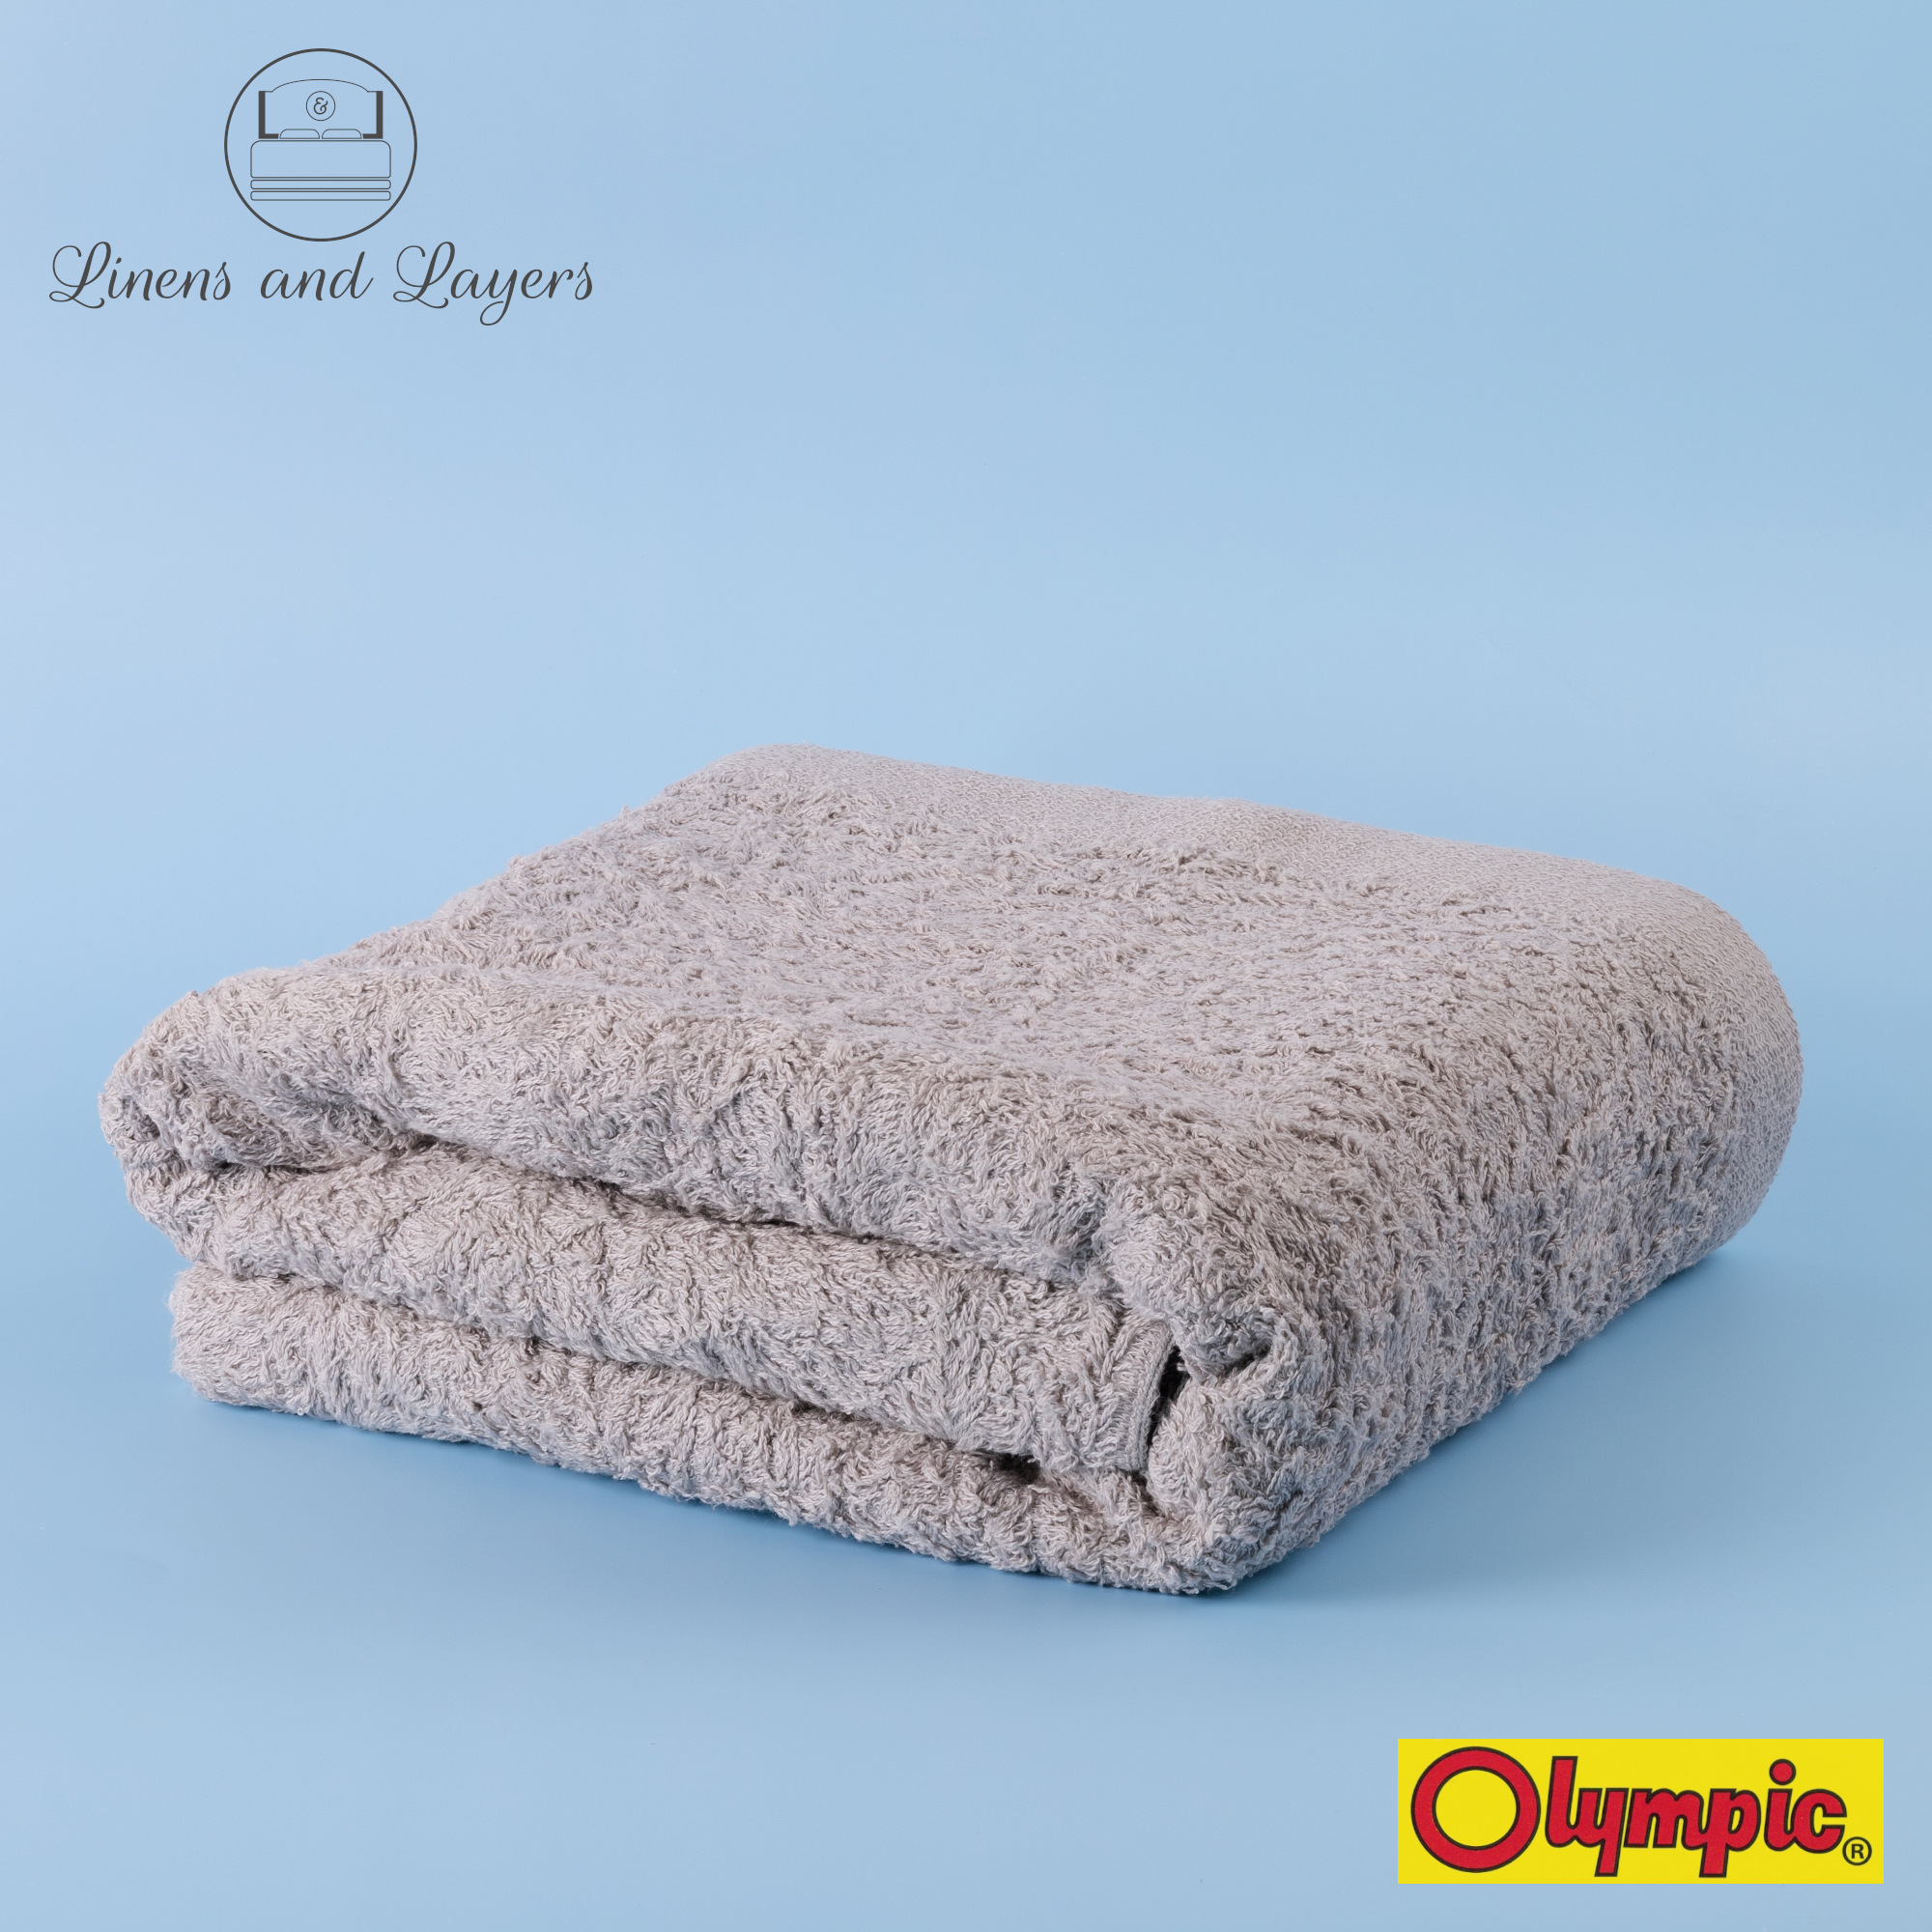 Olympic White Face Towel (430 GSM) - DK-1212 Terrycloth - 12x12